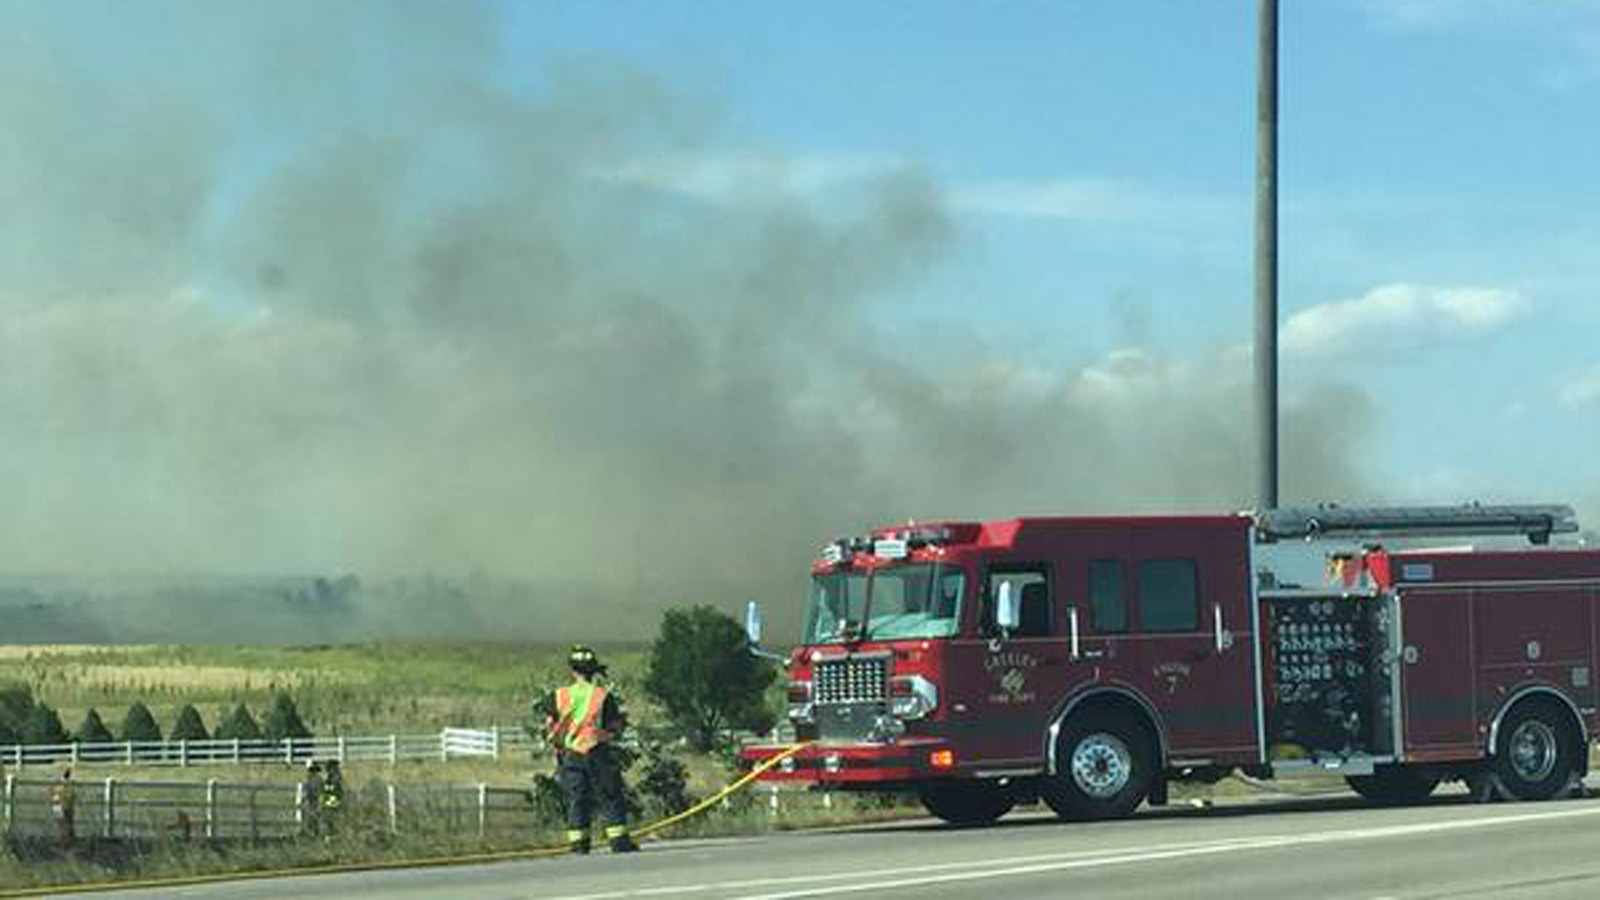 Firefighters battled a brush fire in Greeley on Thursday (credit: CBS)